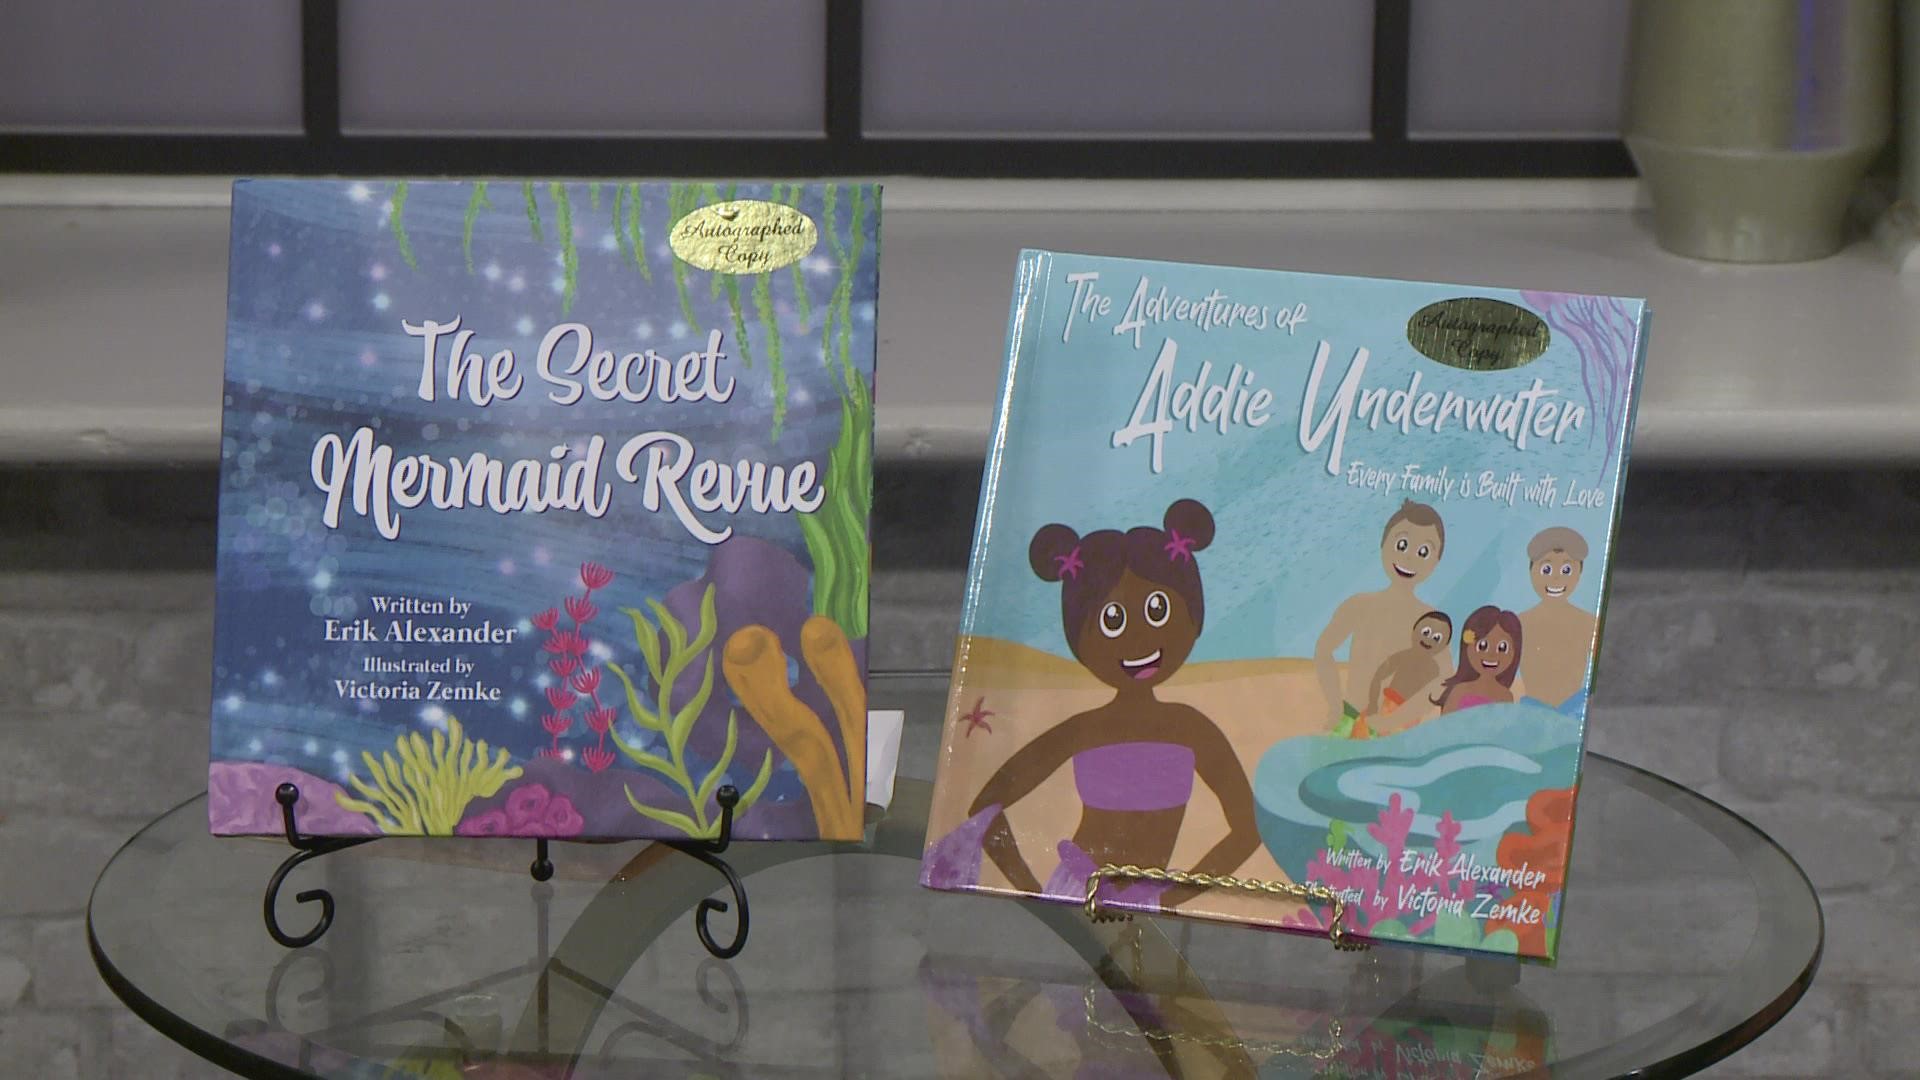 ‘The Adventures of Addie Underwater’ is a children’s book series that tackles difficult questions which will hopefully, in turn, create a much-needed dialogue.